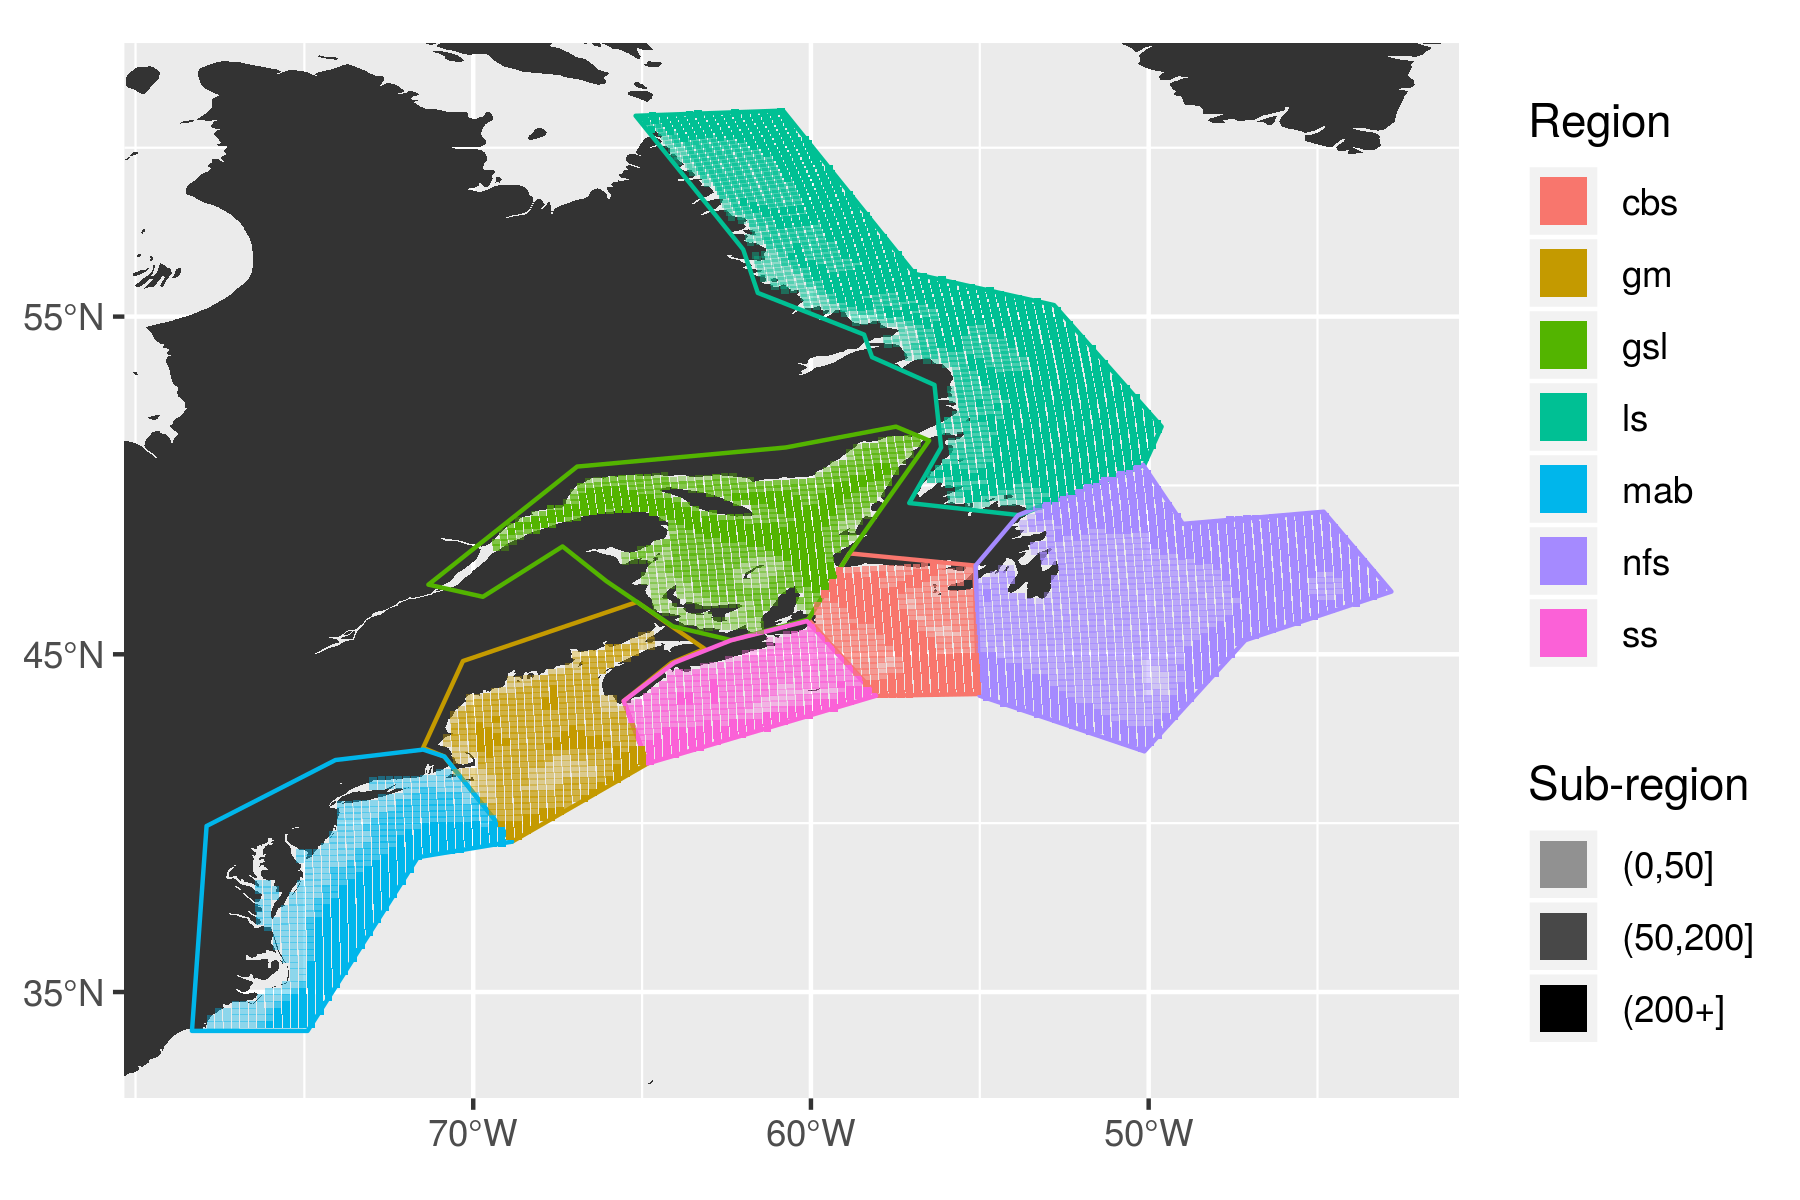 The regions of the coast were devided up by their temperature and salinity regimes based on work by @Richaud2016. The regions were furthered divided into sub-regions based on their depth.